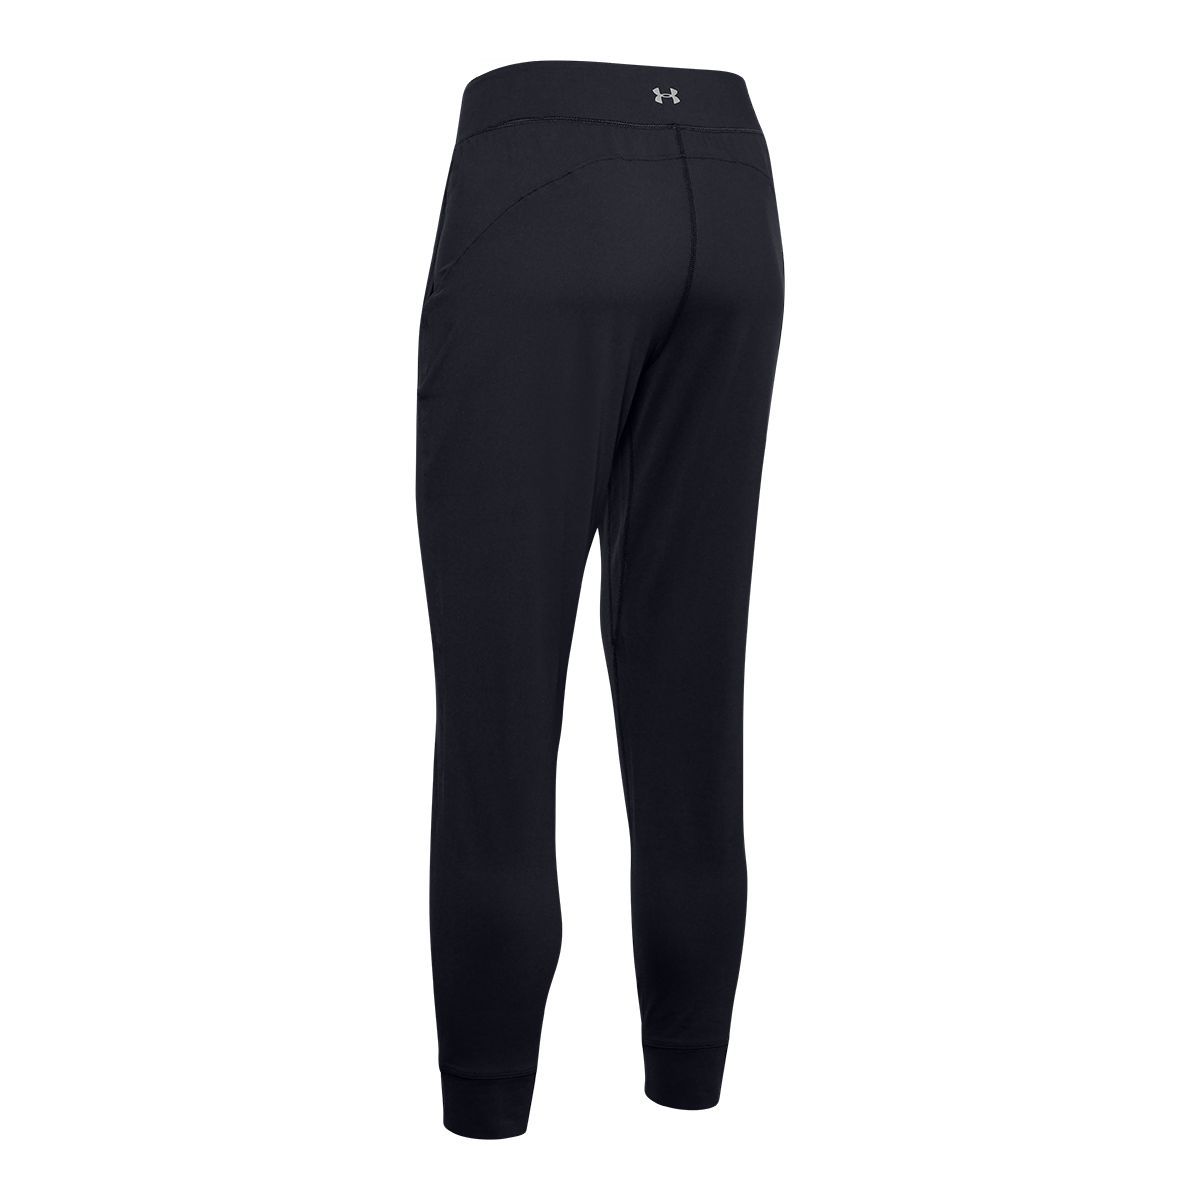  Under Armour Plus Size Meridian Joggers Black/Metallic Silver  3X : Clothing, Shoes & Jewelry